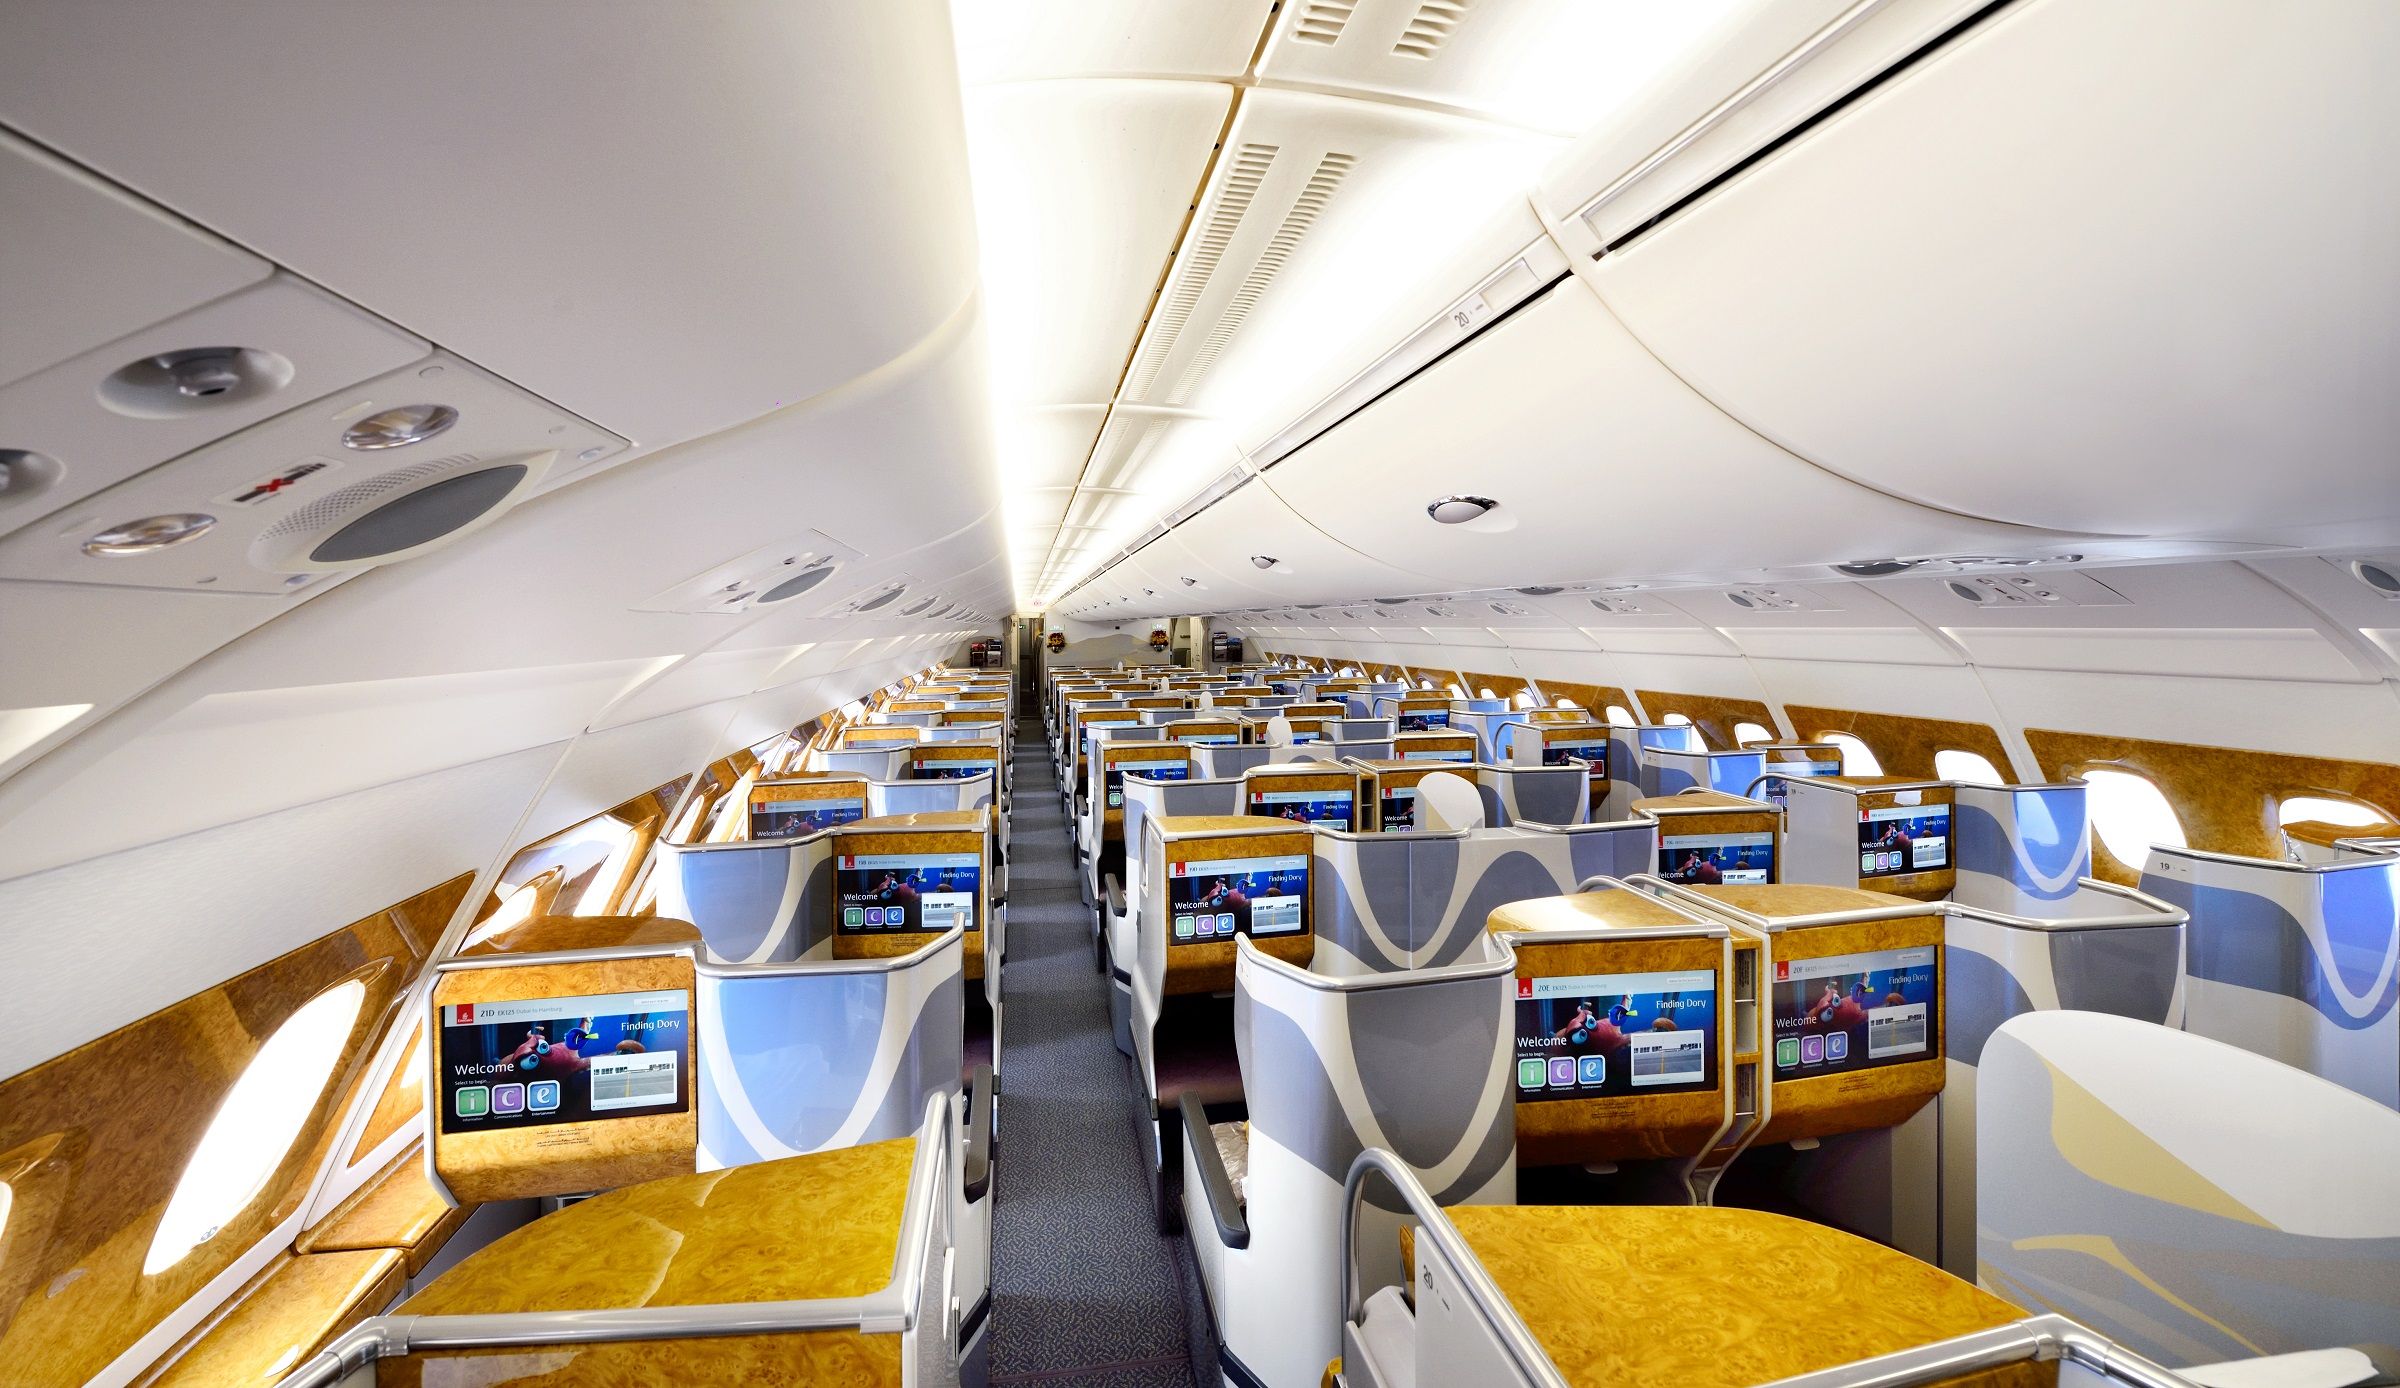 Qatar Airways Qsuite Vs Emirates Business Class - Which Is Better?